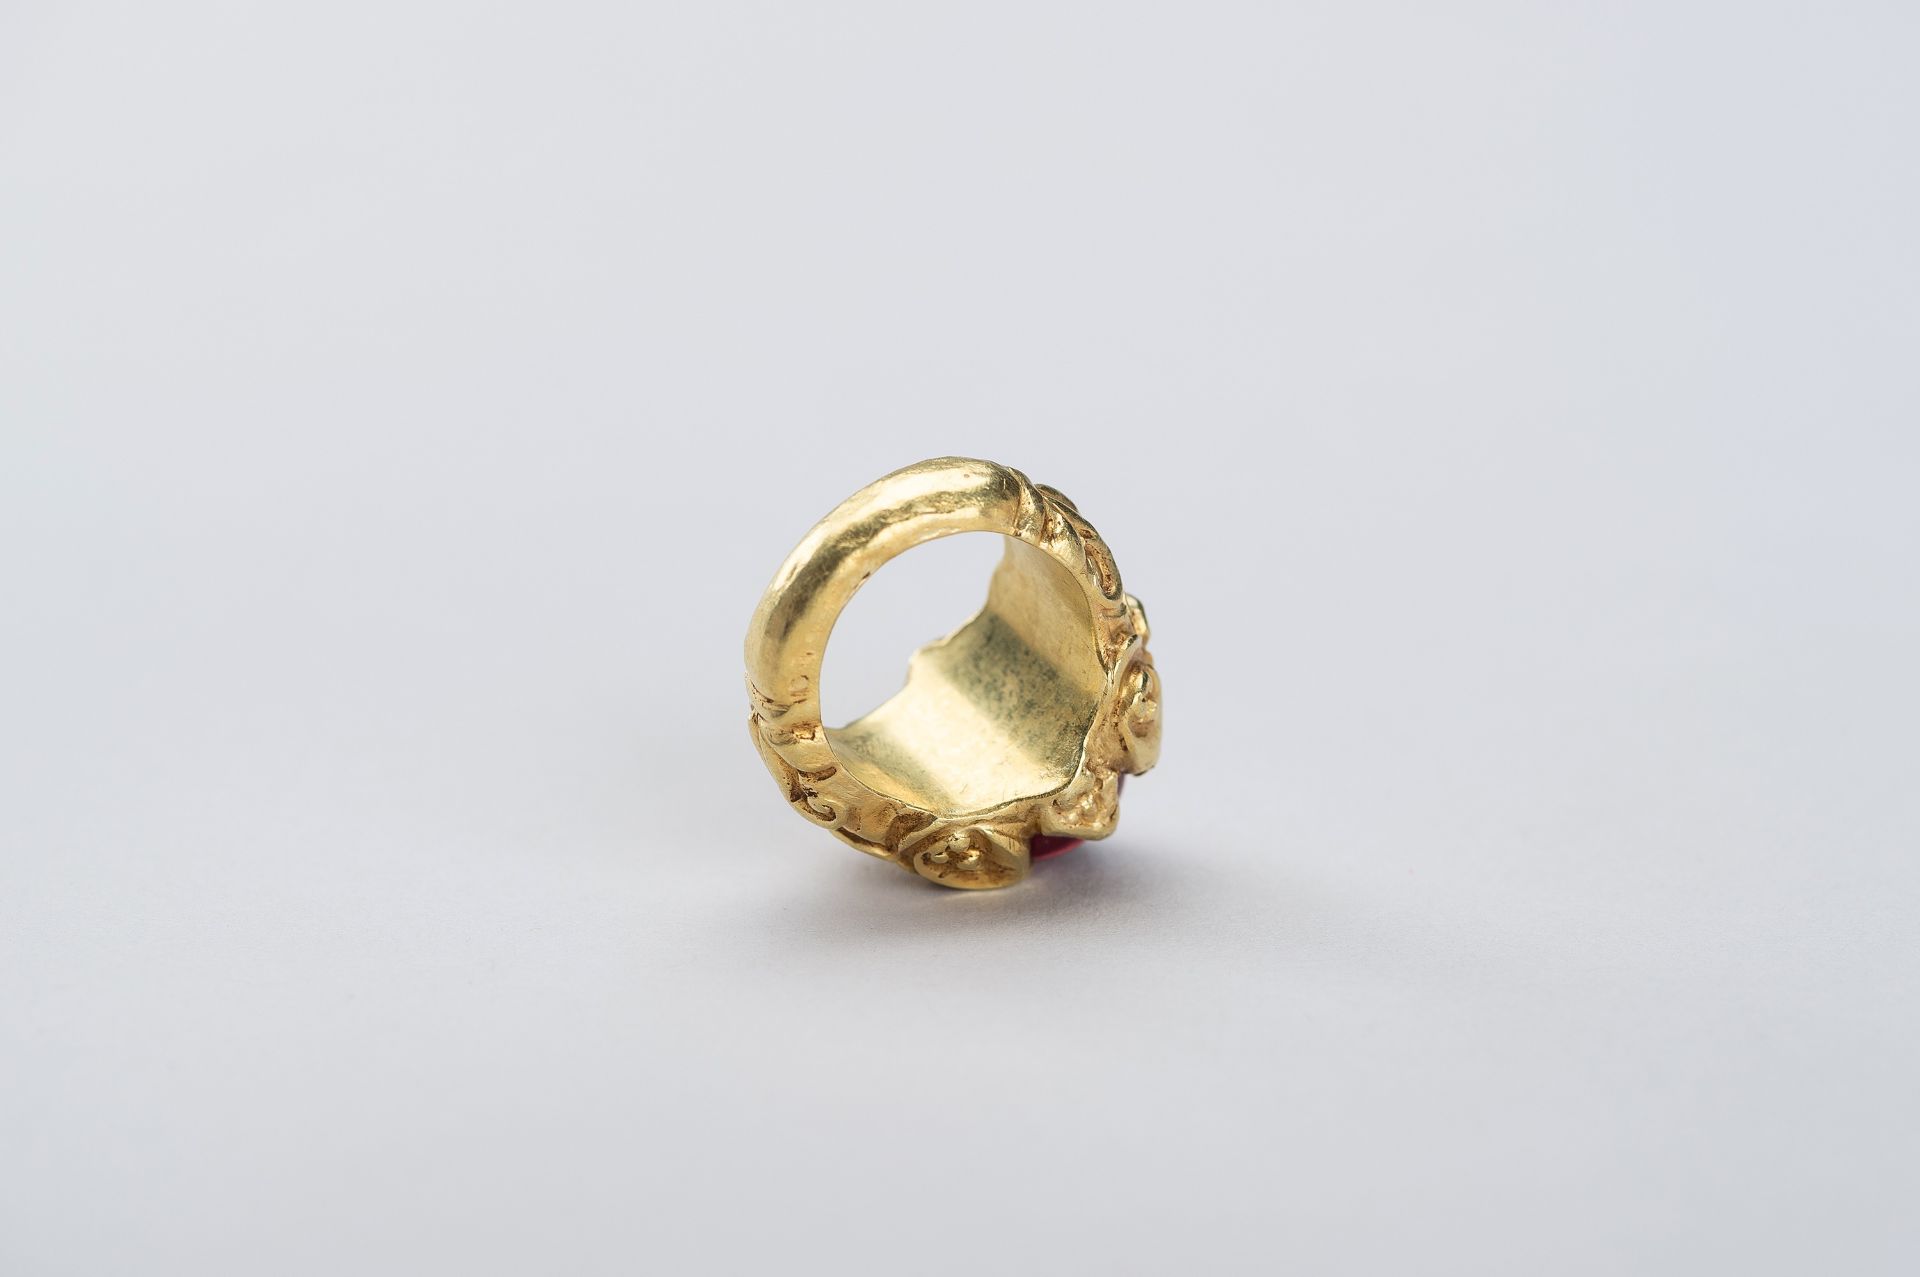 A BURMESE GOLD RING WITH 3 CARAT RUBY - Image 8 of 10